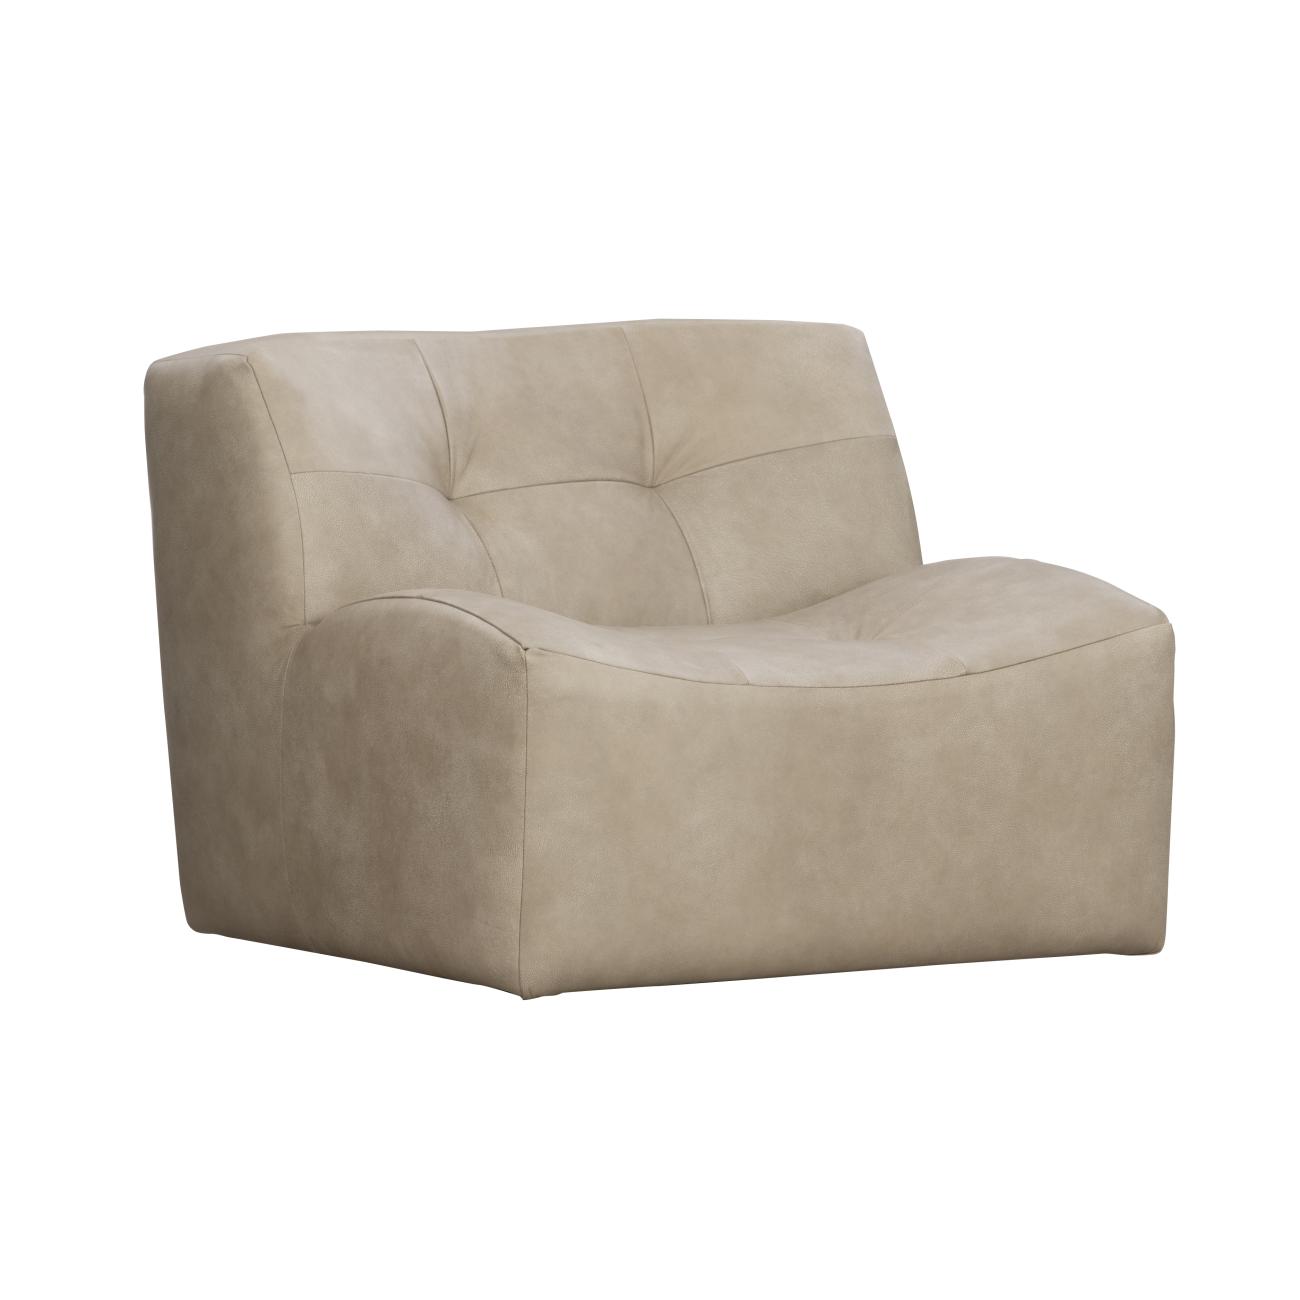 The Gabriel Swivel in Sand from Classic Home